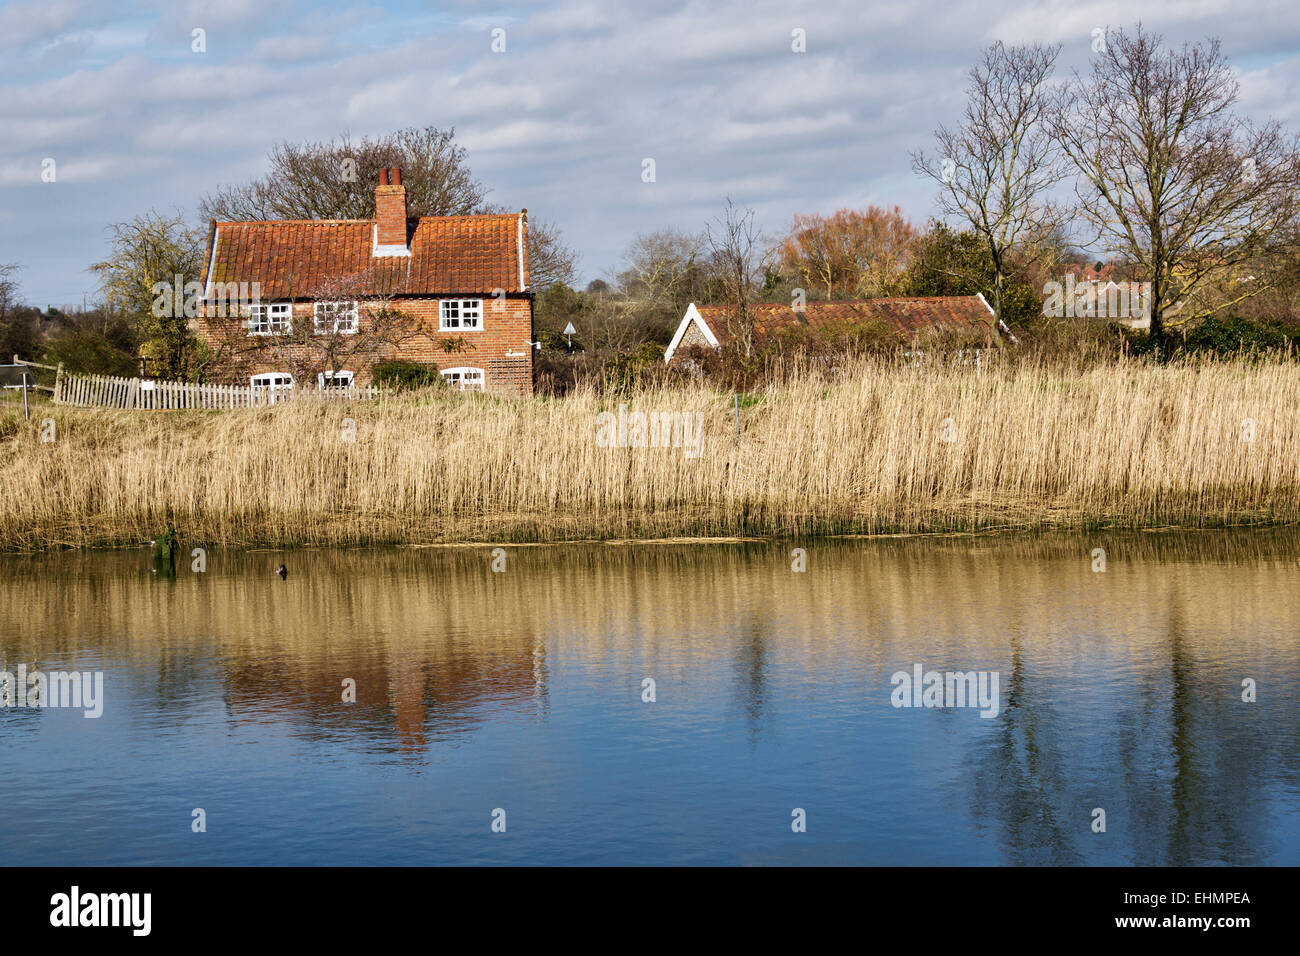 Snape Maltings, Suffolk, UK. The River Alde runs through extensive reedbeds full of wading birds Stock Photo